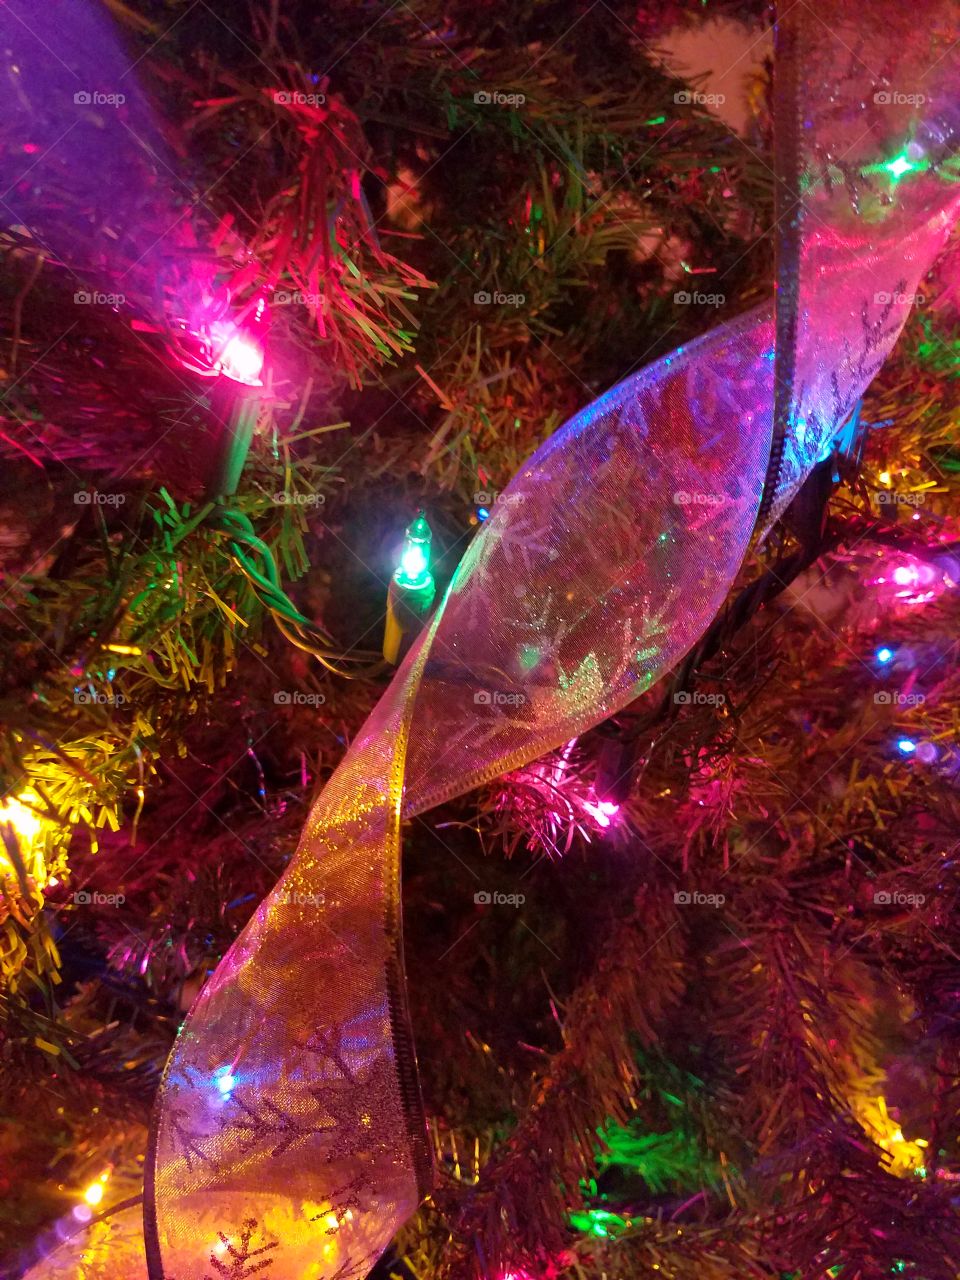 We love the relaxation of enjoying the Christmas Tree lights and ribbon, draped around the tree.